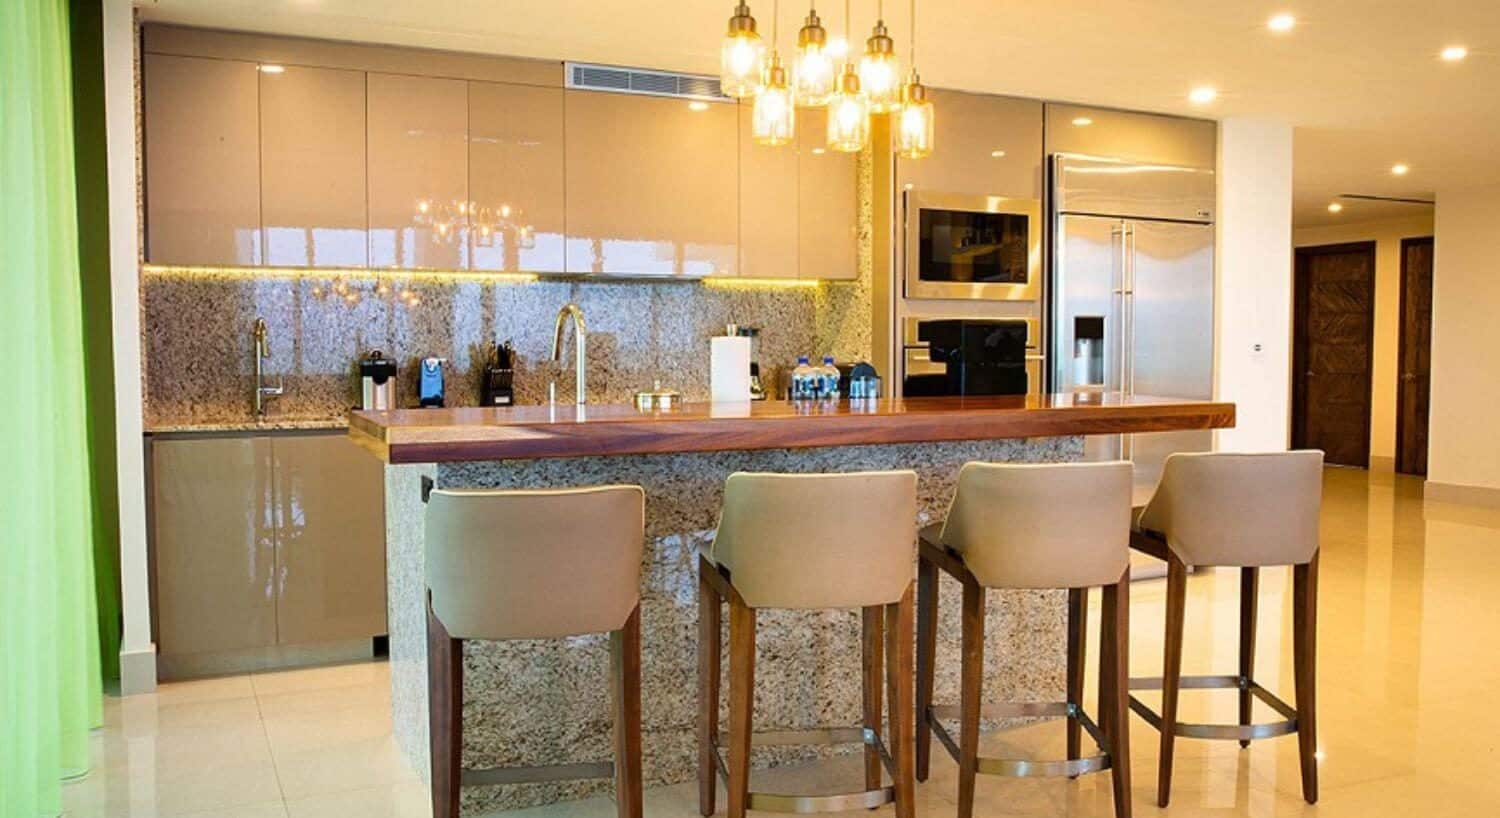 A gourmet kitchen with stainless steel appliances, and a breakfast bar with 4 bar stools.